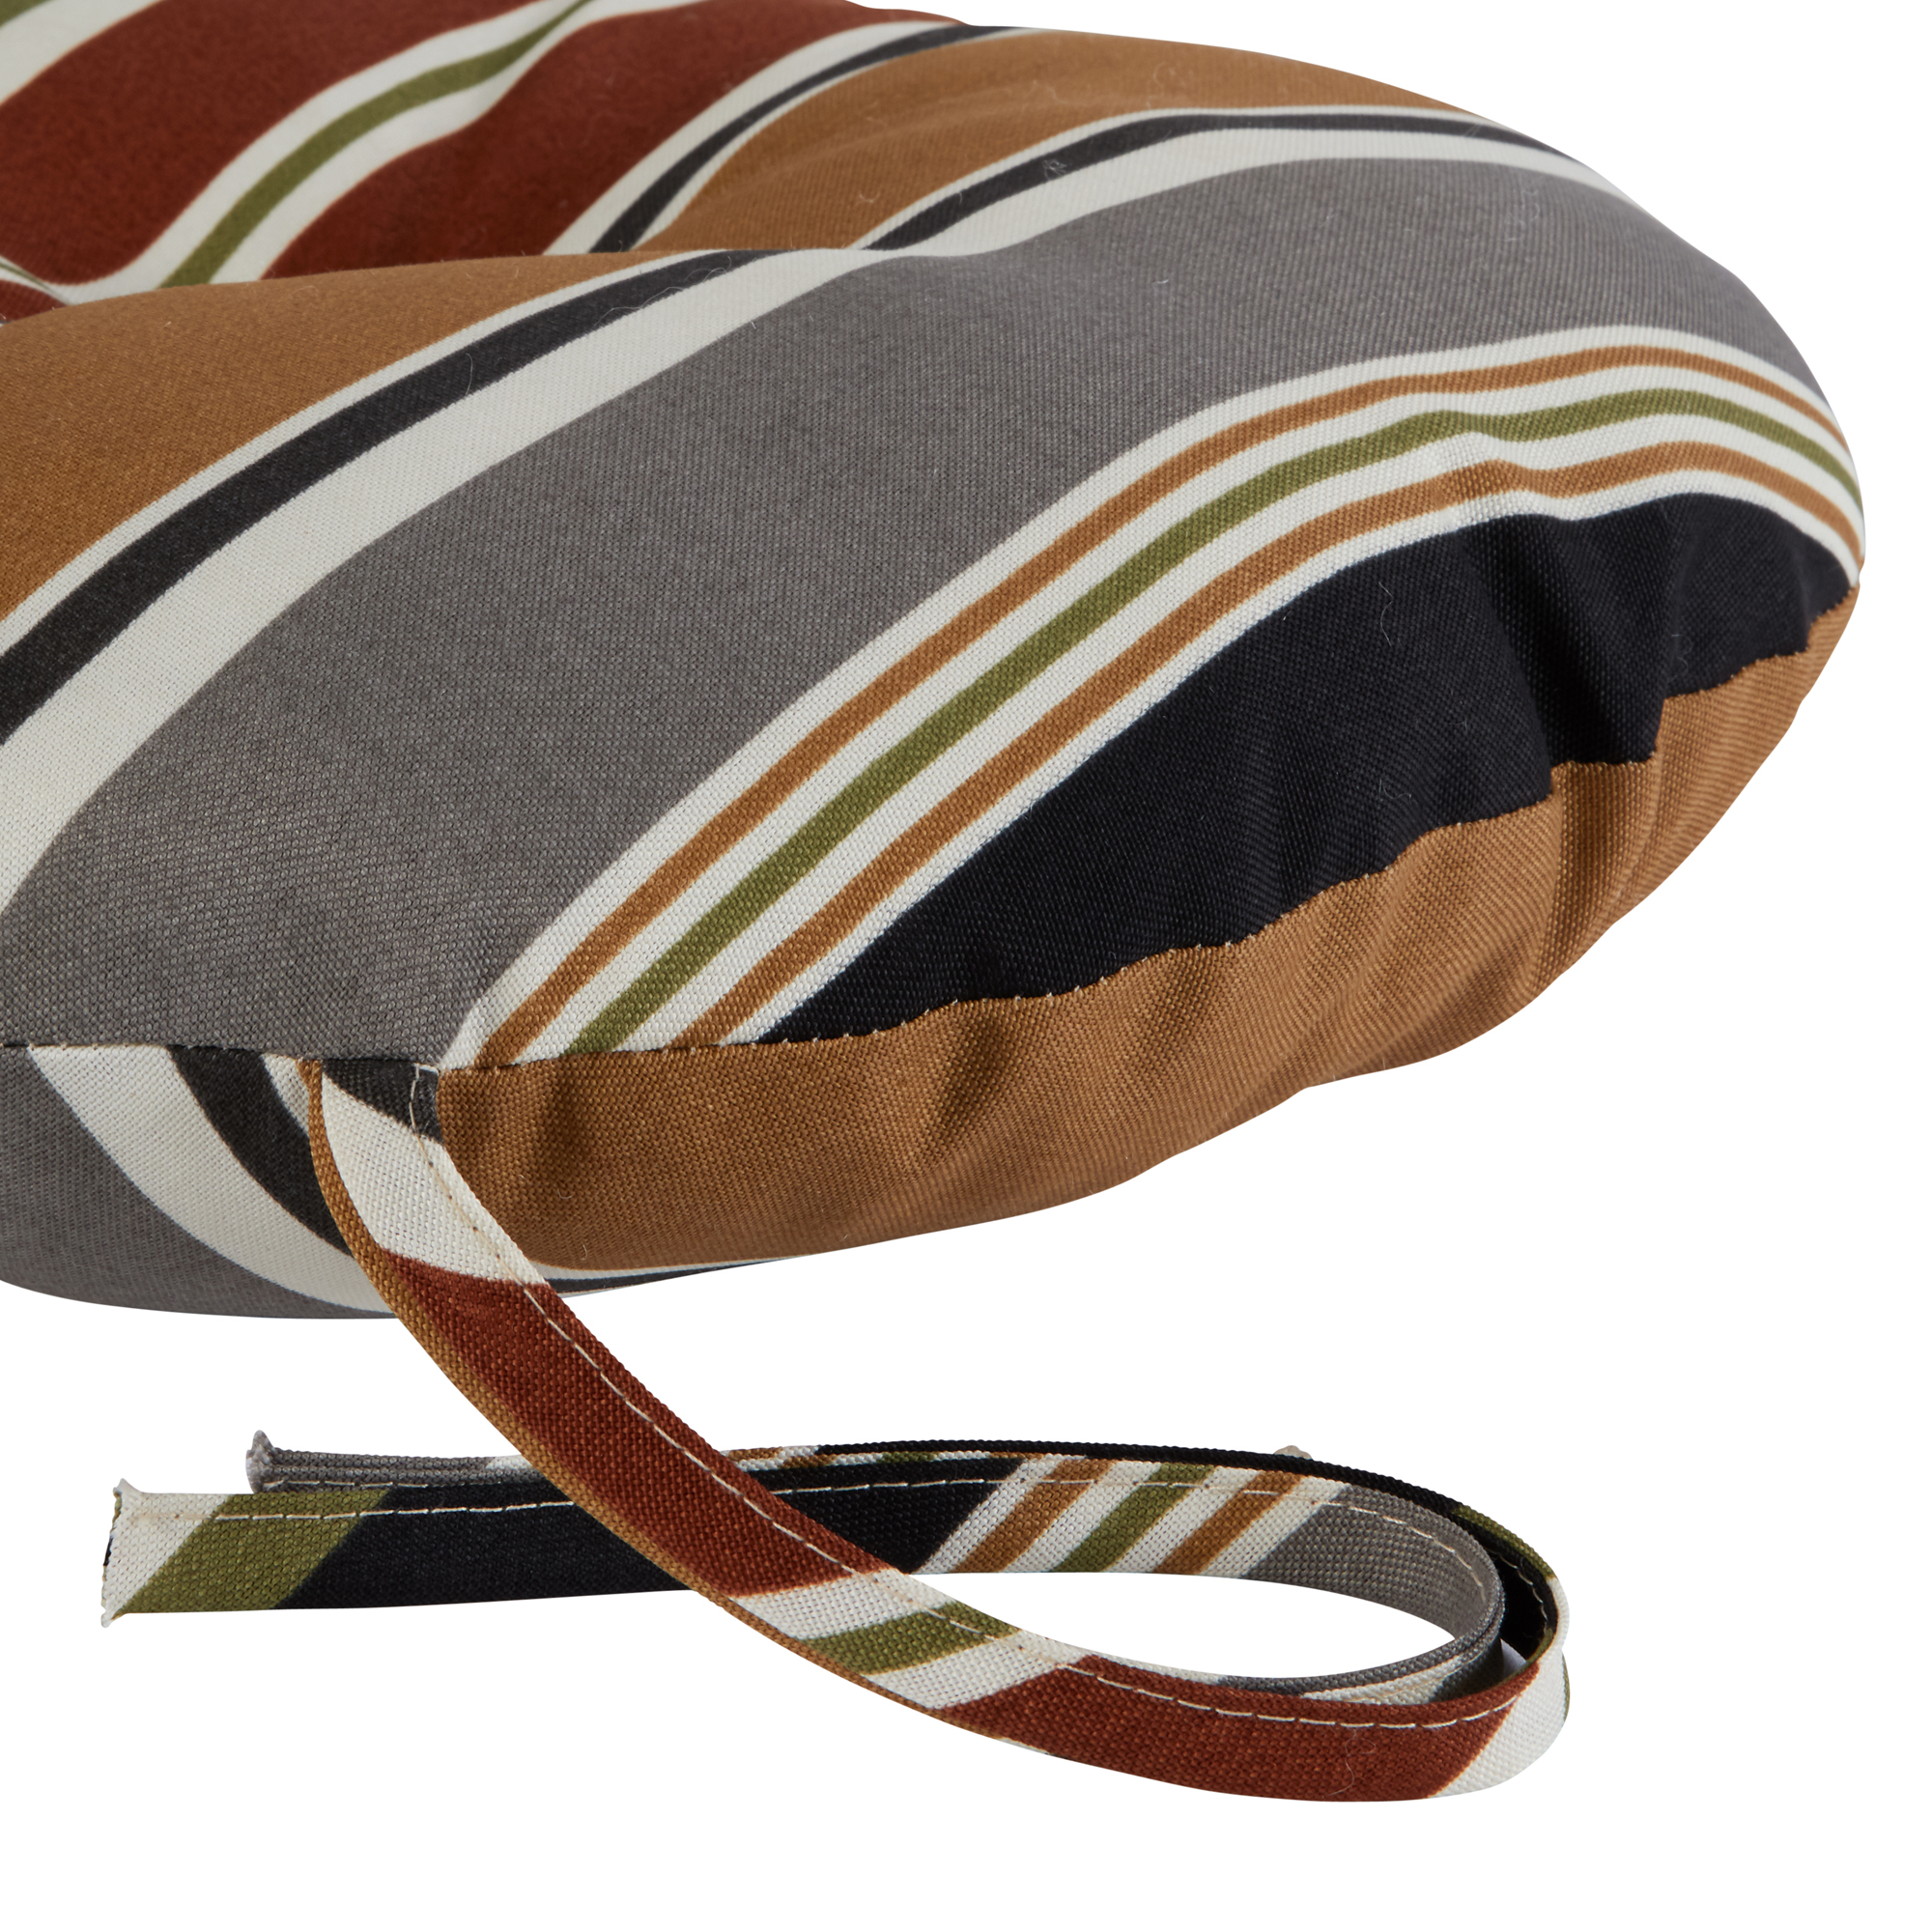 Greendale Home Fashions Brick Stripe 15 in. Round Outdoor Reversible Bistro Seat Cushion (Set of 2) - image 4 of 7